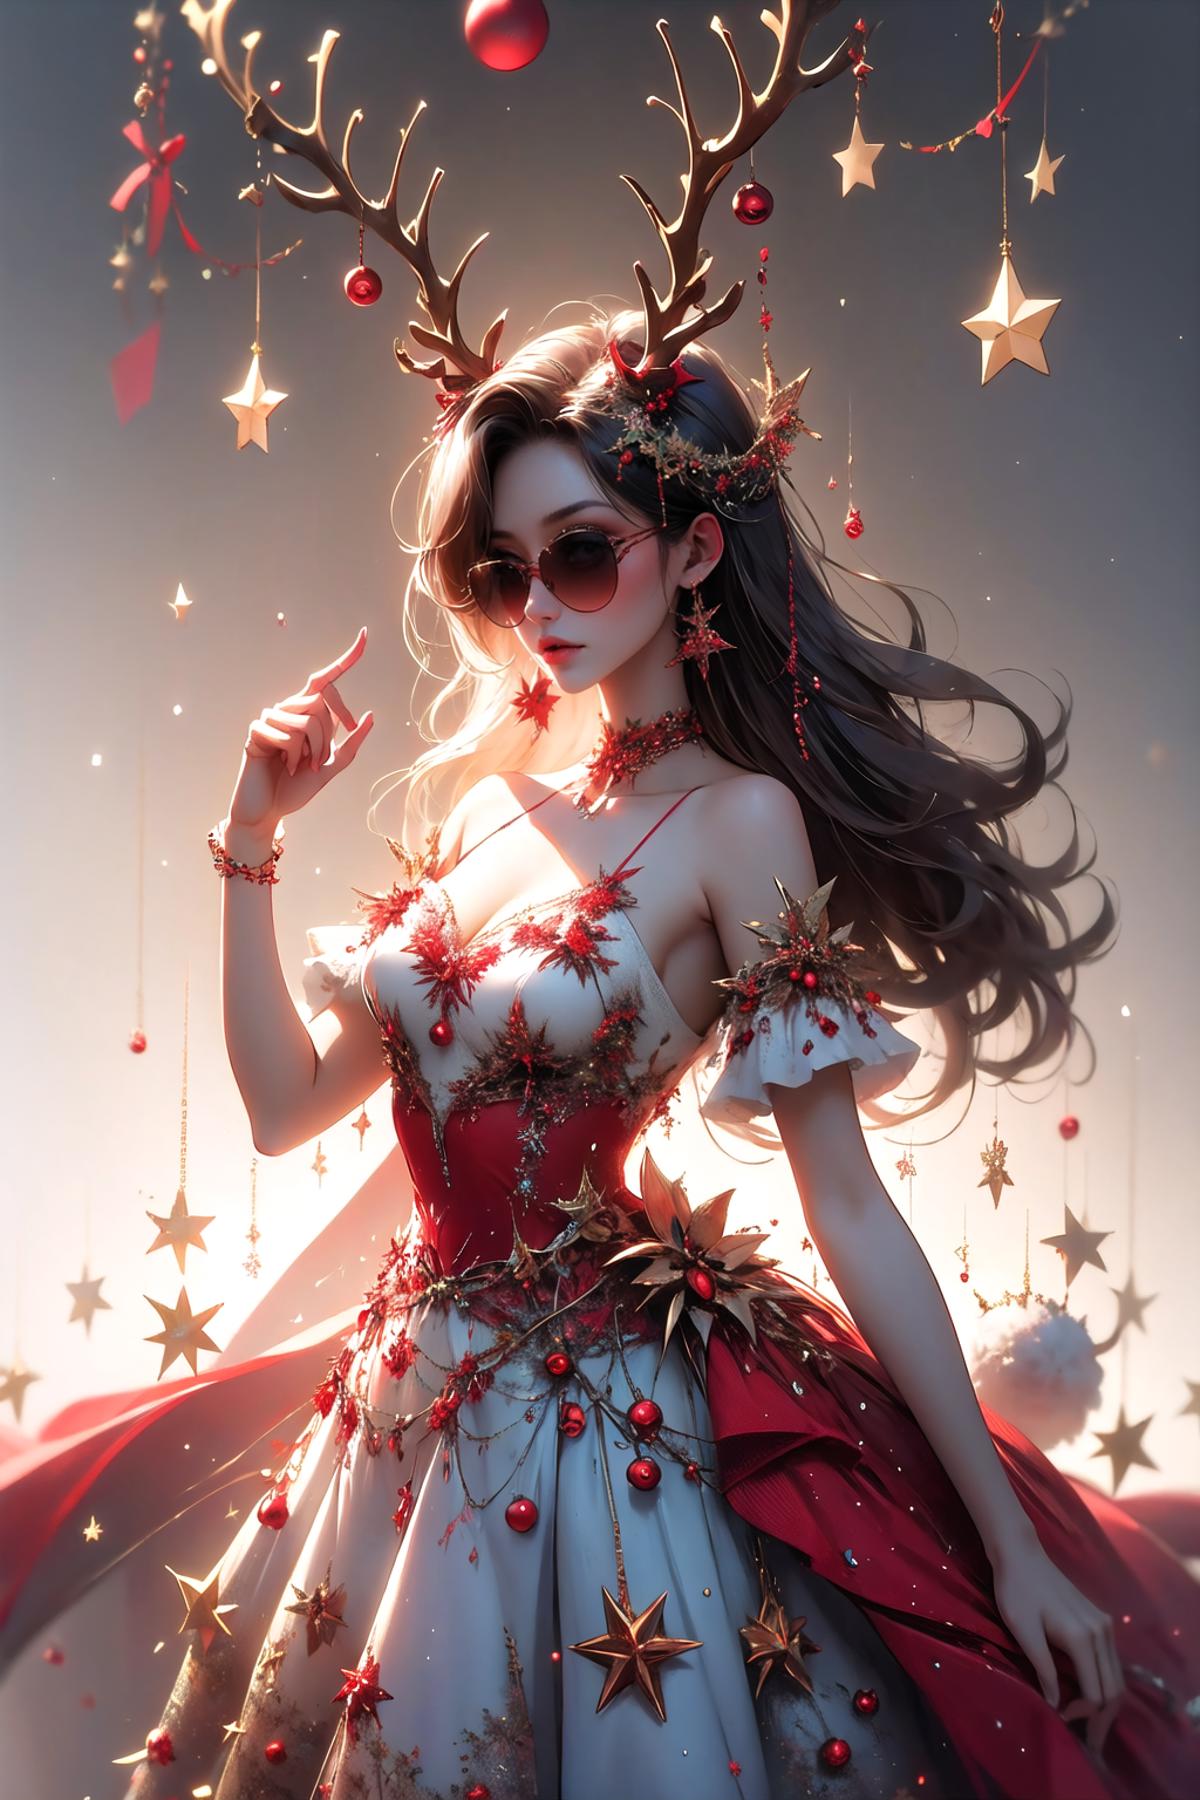 A beautiful woman in a red dress with stars and ornaments around her neck.